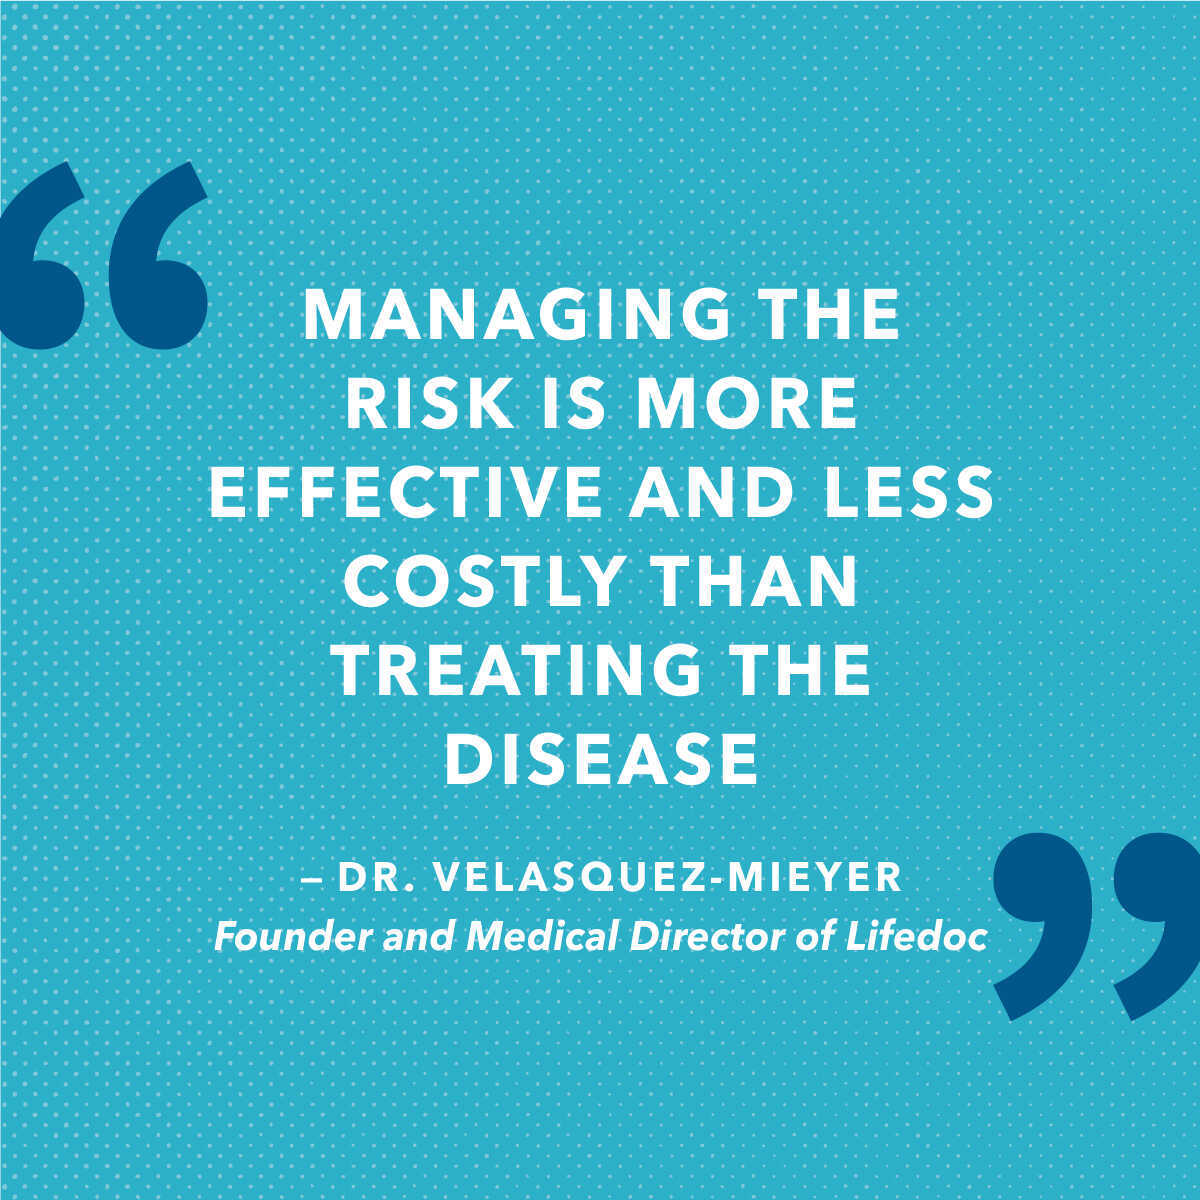 Managing the risk is more effective and less costly than treating the disease.